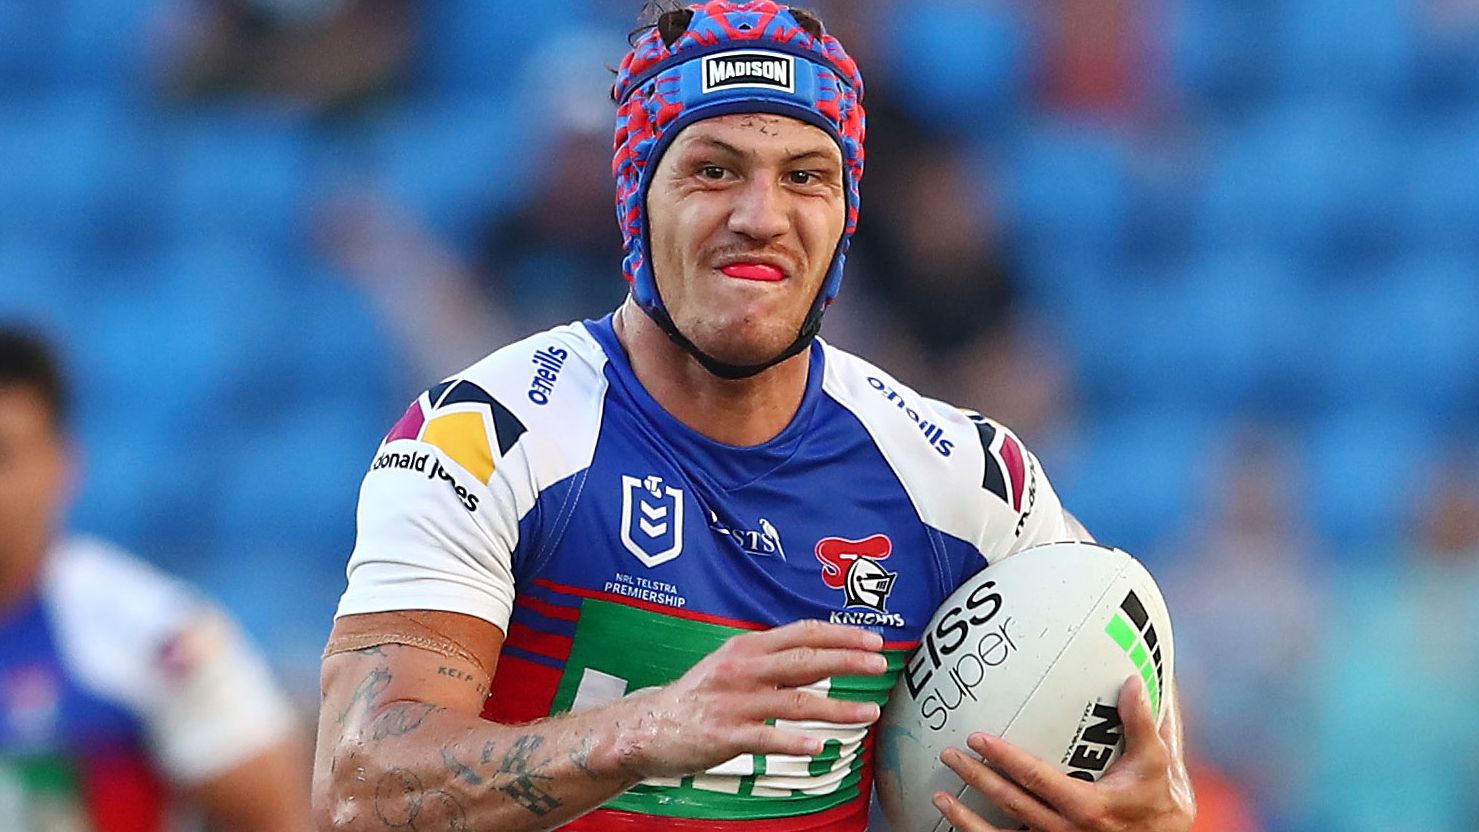 EXCLUSIVE: Andrew Johns takes aim at 'circus' surrounding Kalyn Ponga's Knights extension